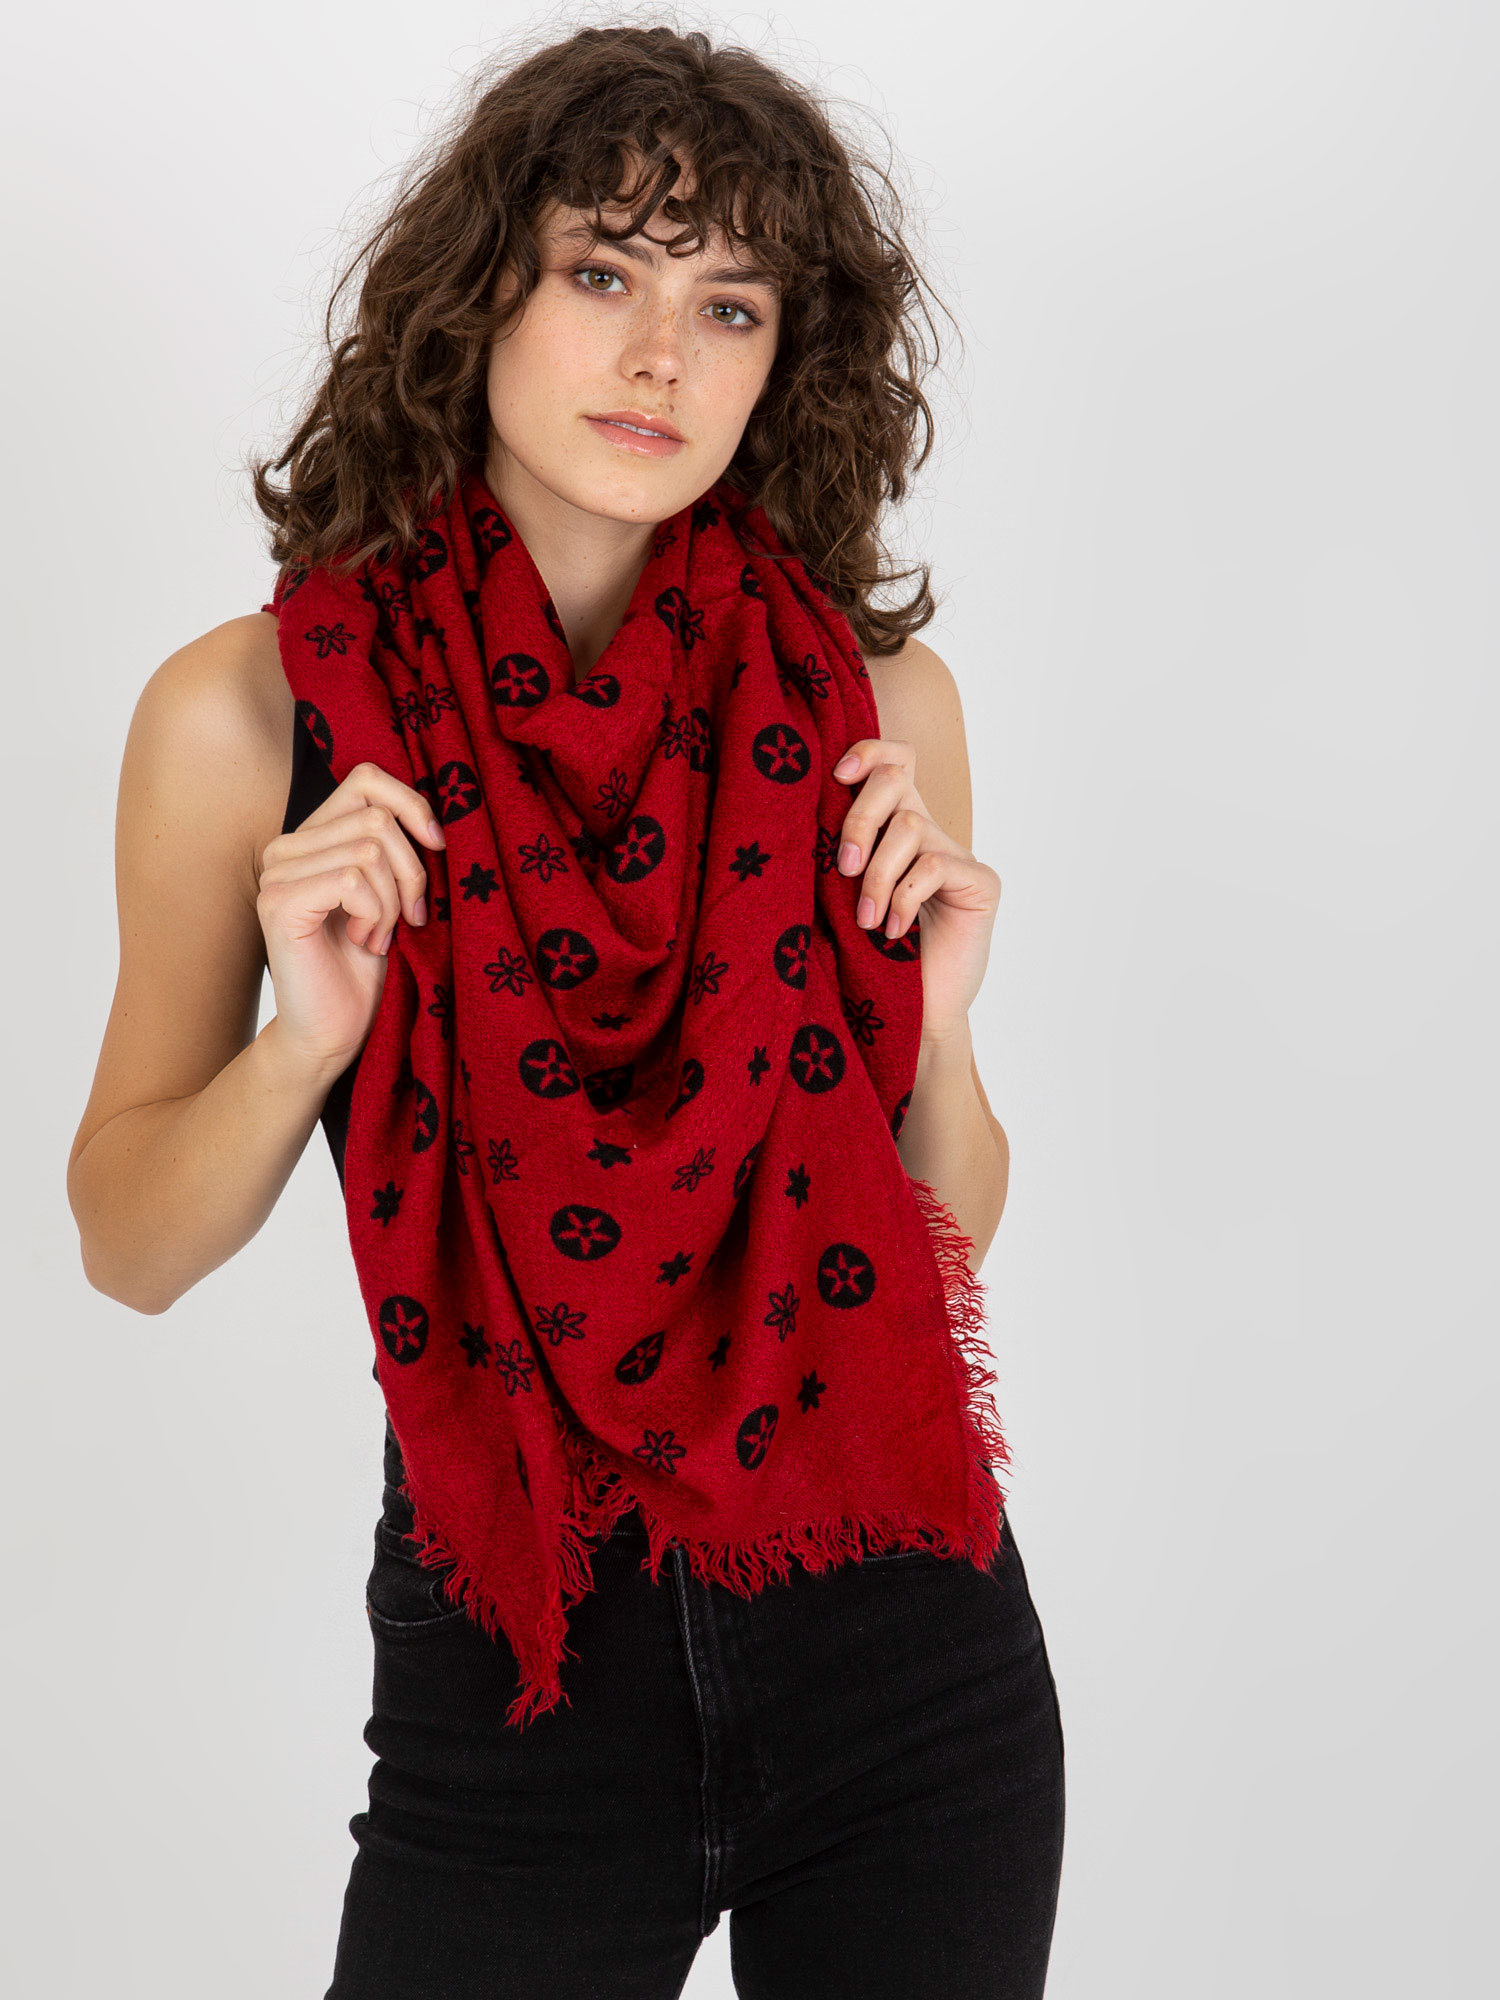 Women's scarf with print - red